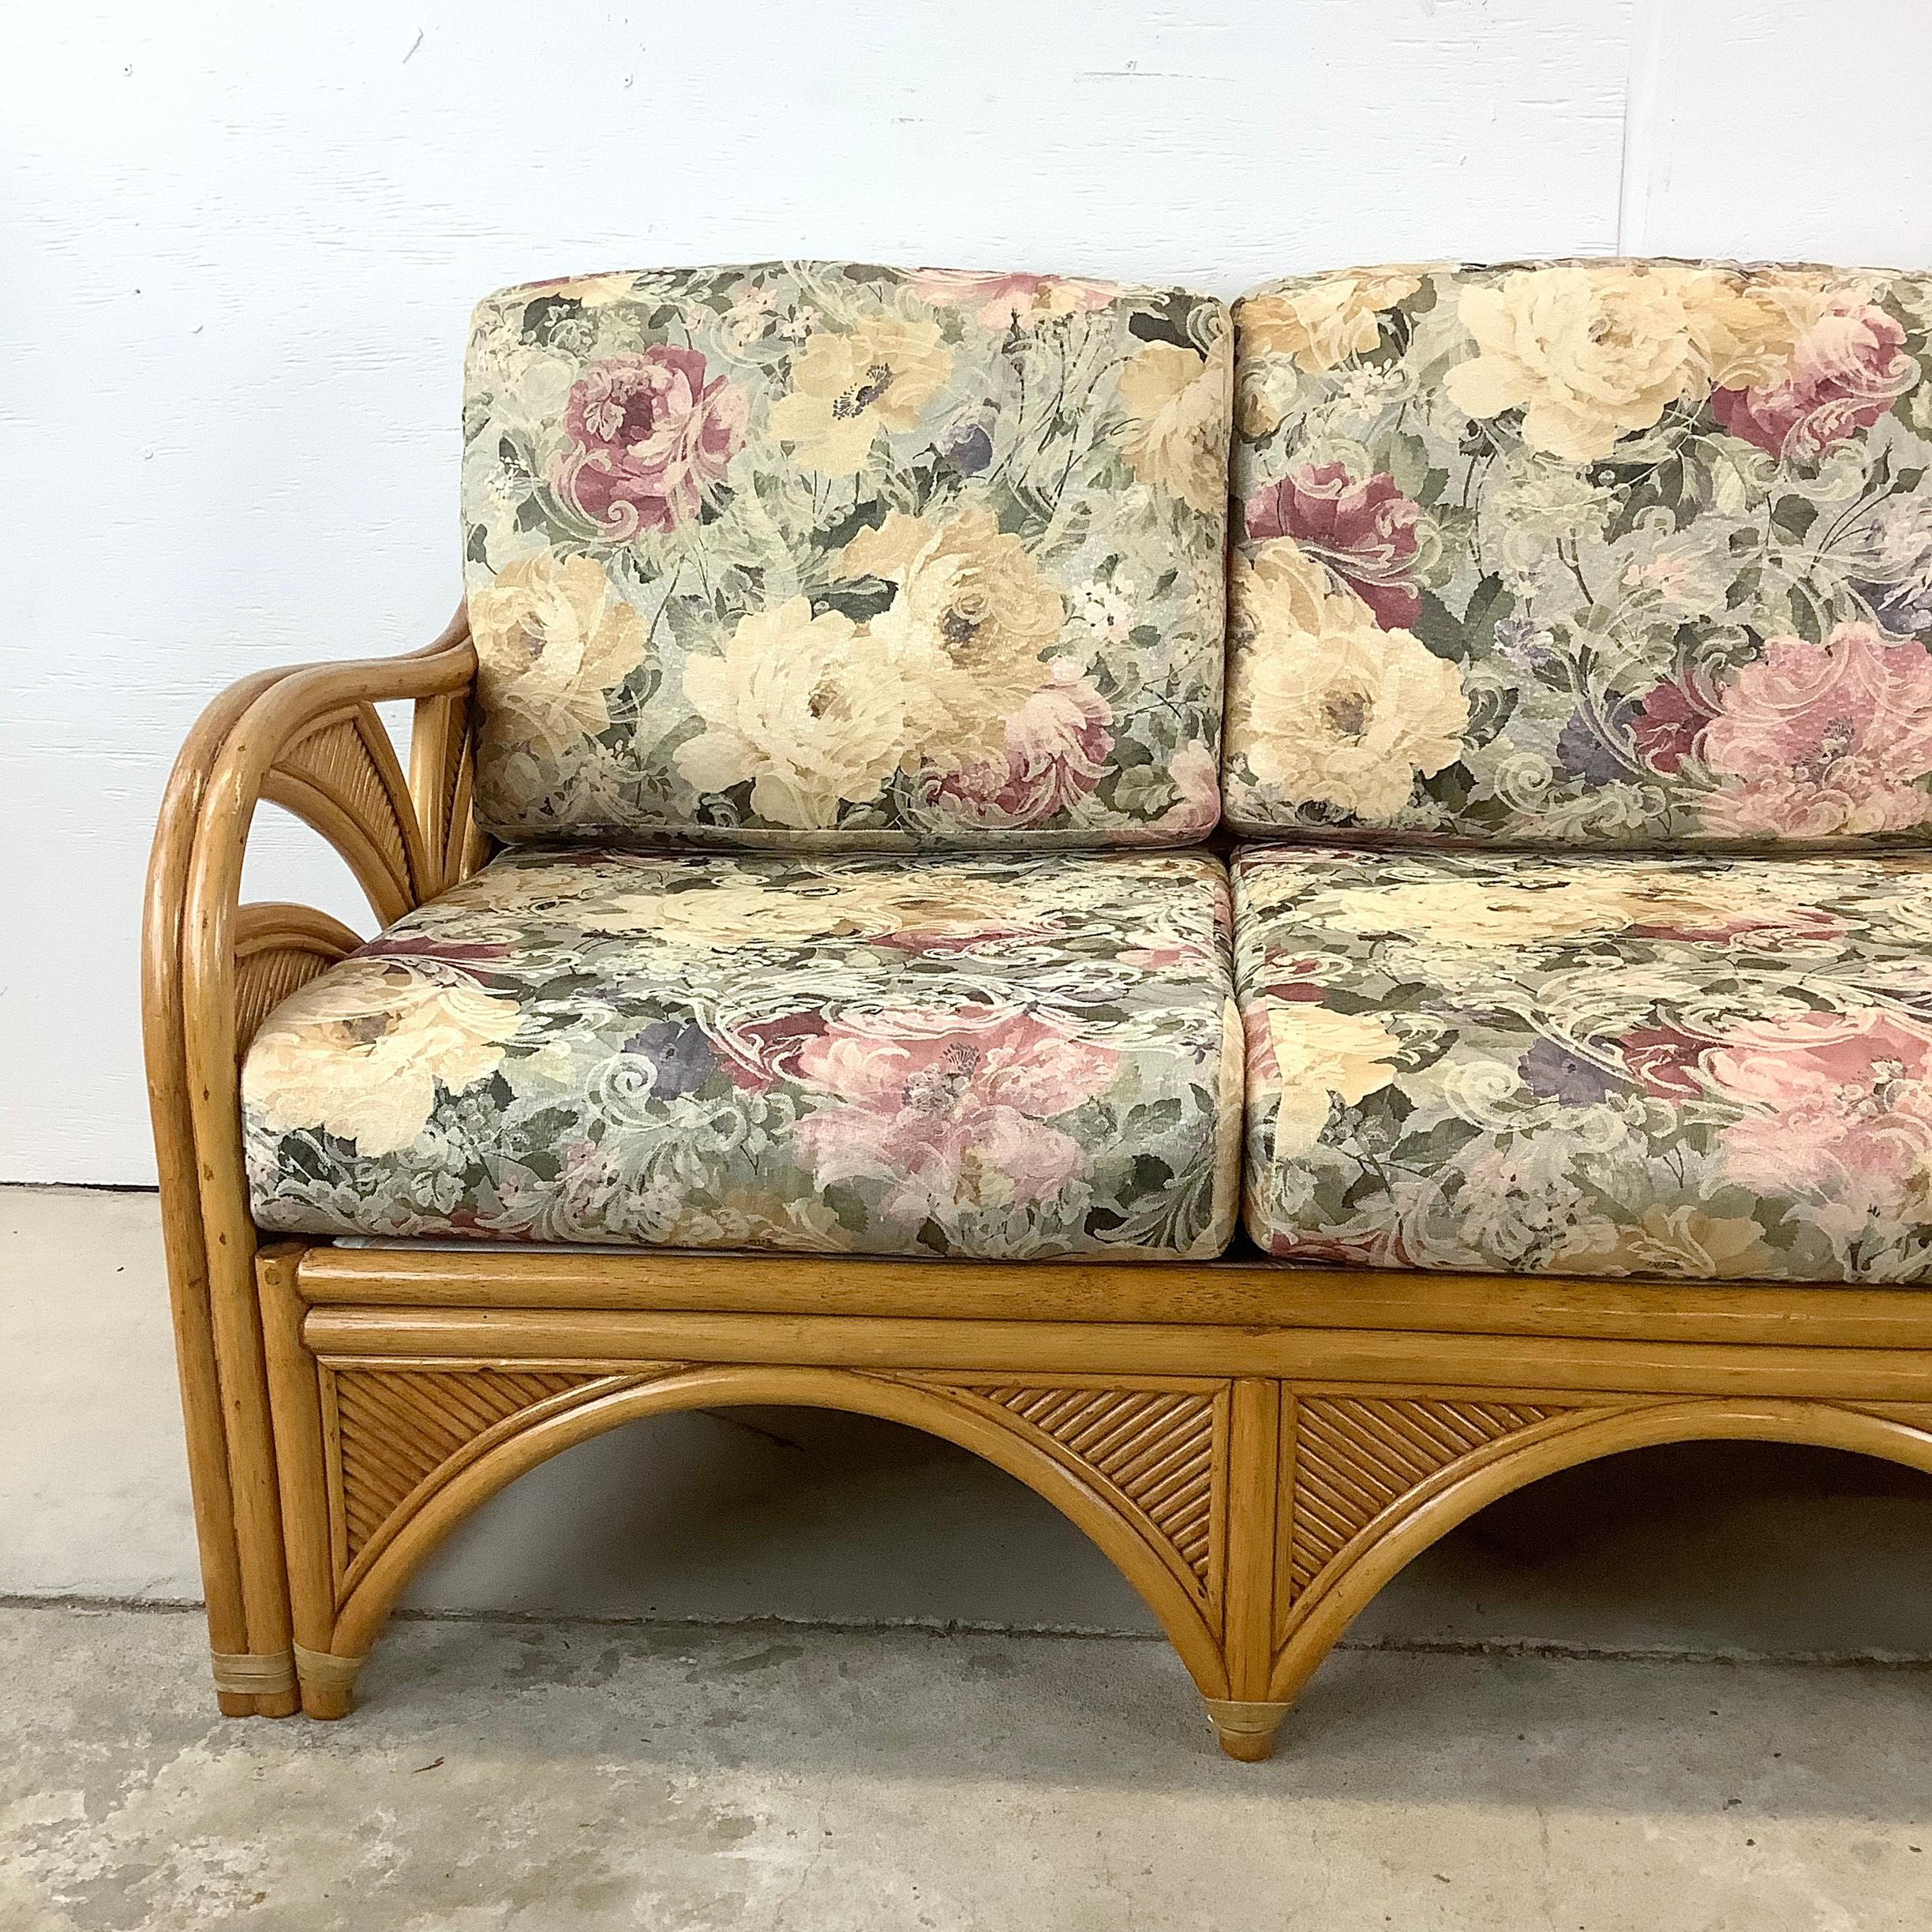 Unknown Vintage Boho Rattan Sofa With Floral Upholstery